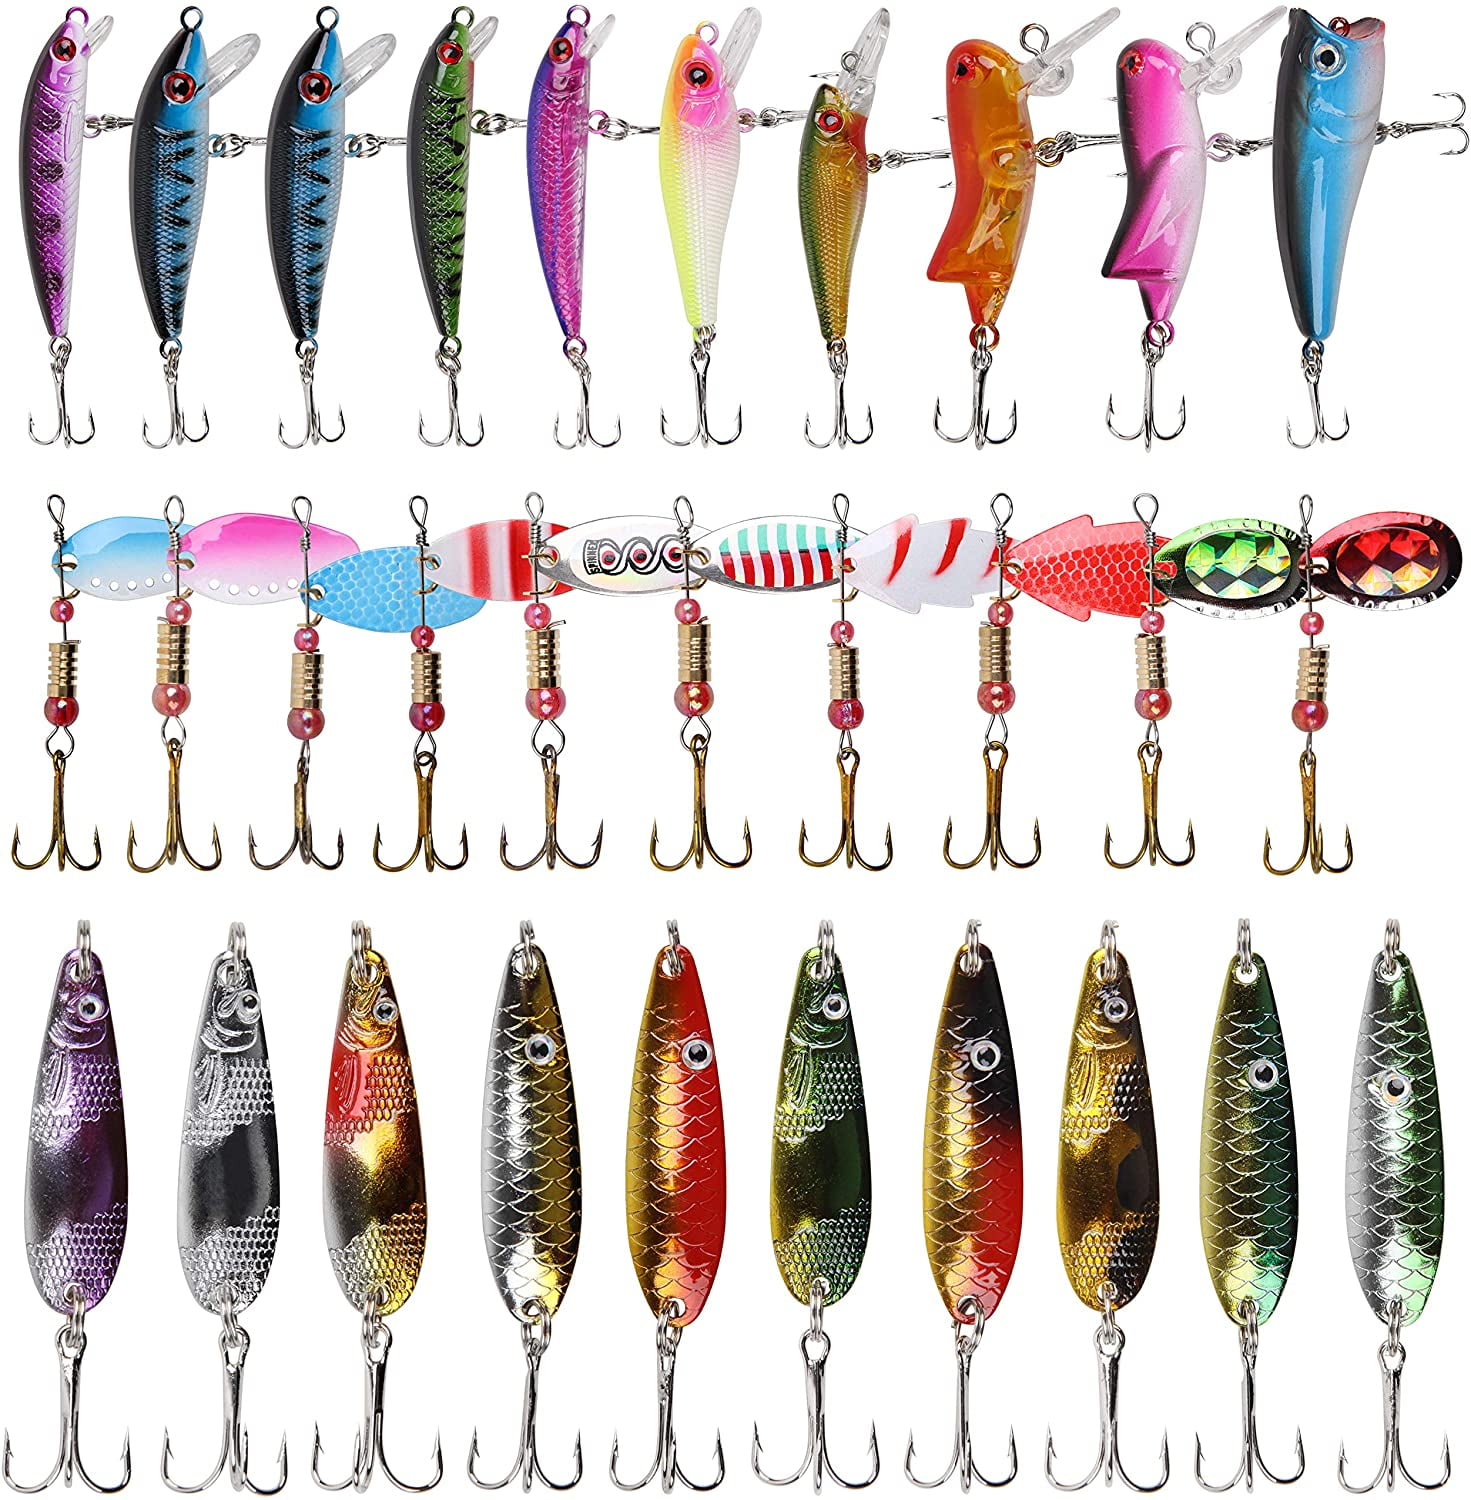 2x fishing lure spoon bait ideal for bass trout perch pike rotating fishing GAB 